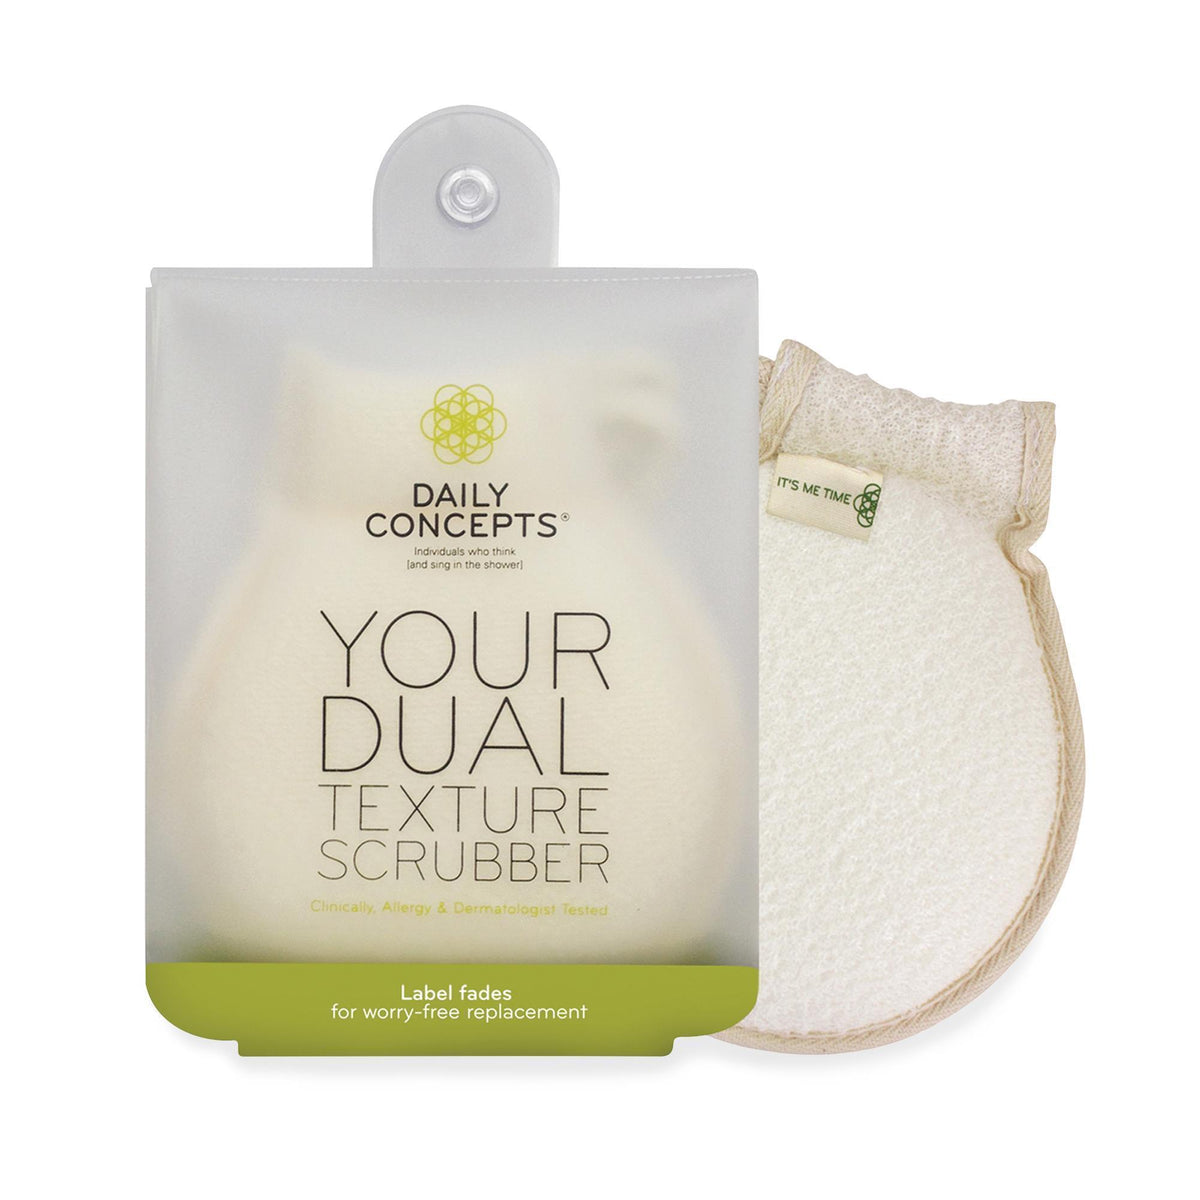 Daily Concepts Your Dual Texture Scrubber